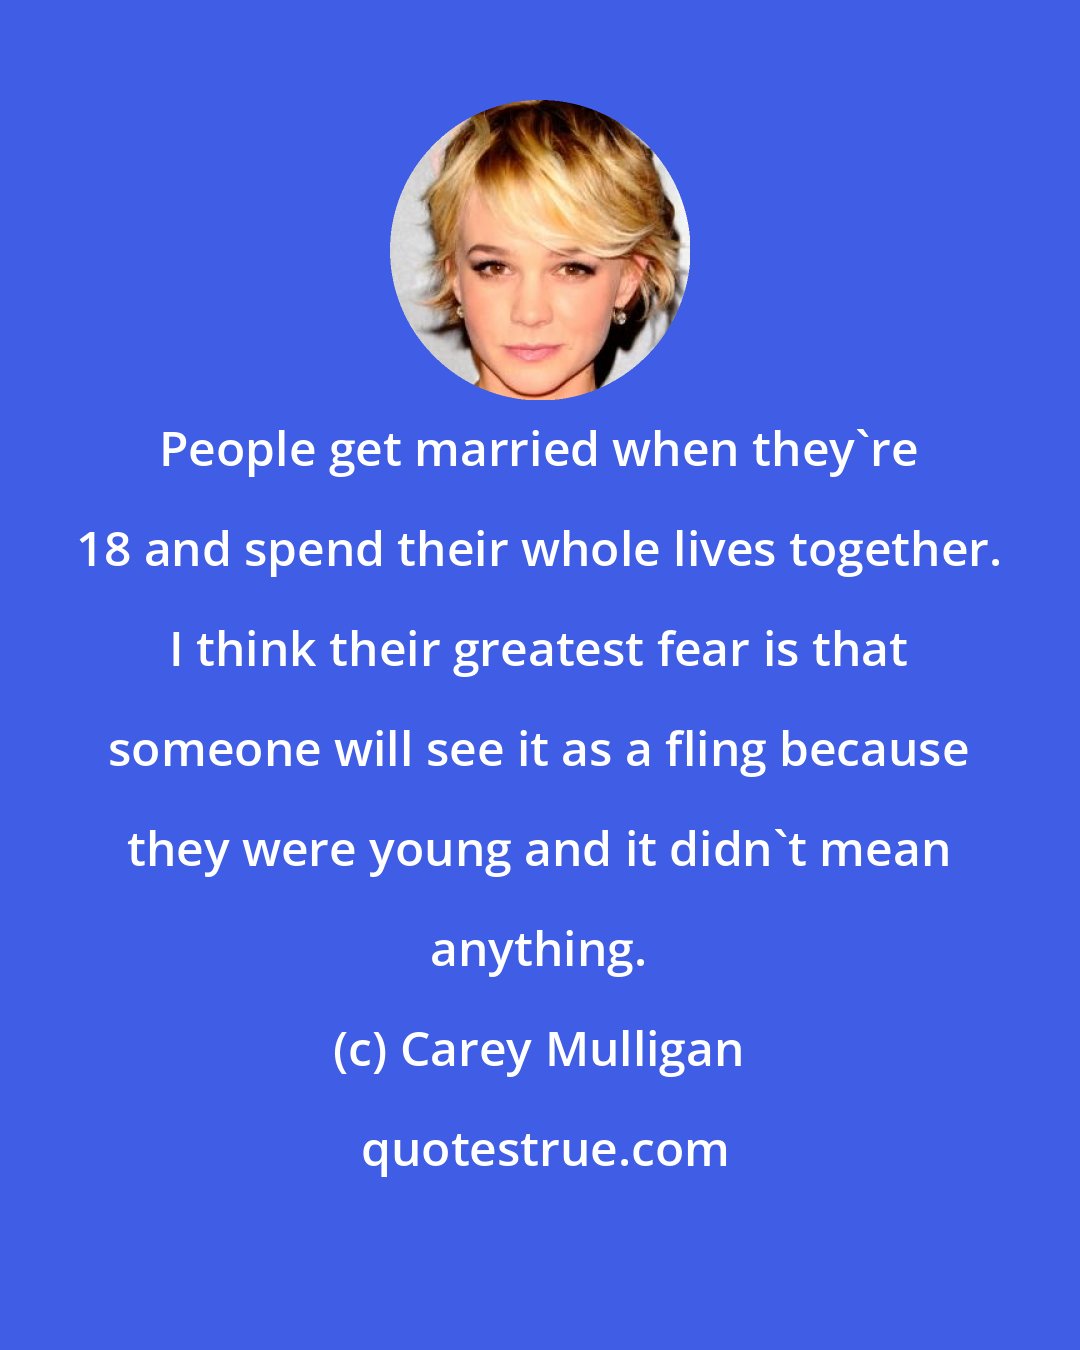 Carey Mulligan: People get married when they're 18 and spend their whole lives together. I think their greatest fear is that someone will see it as a fling because they were young and it didn't mean anything.